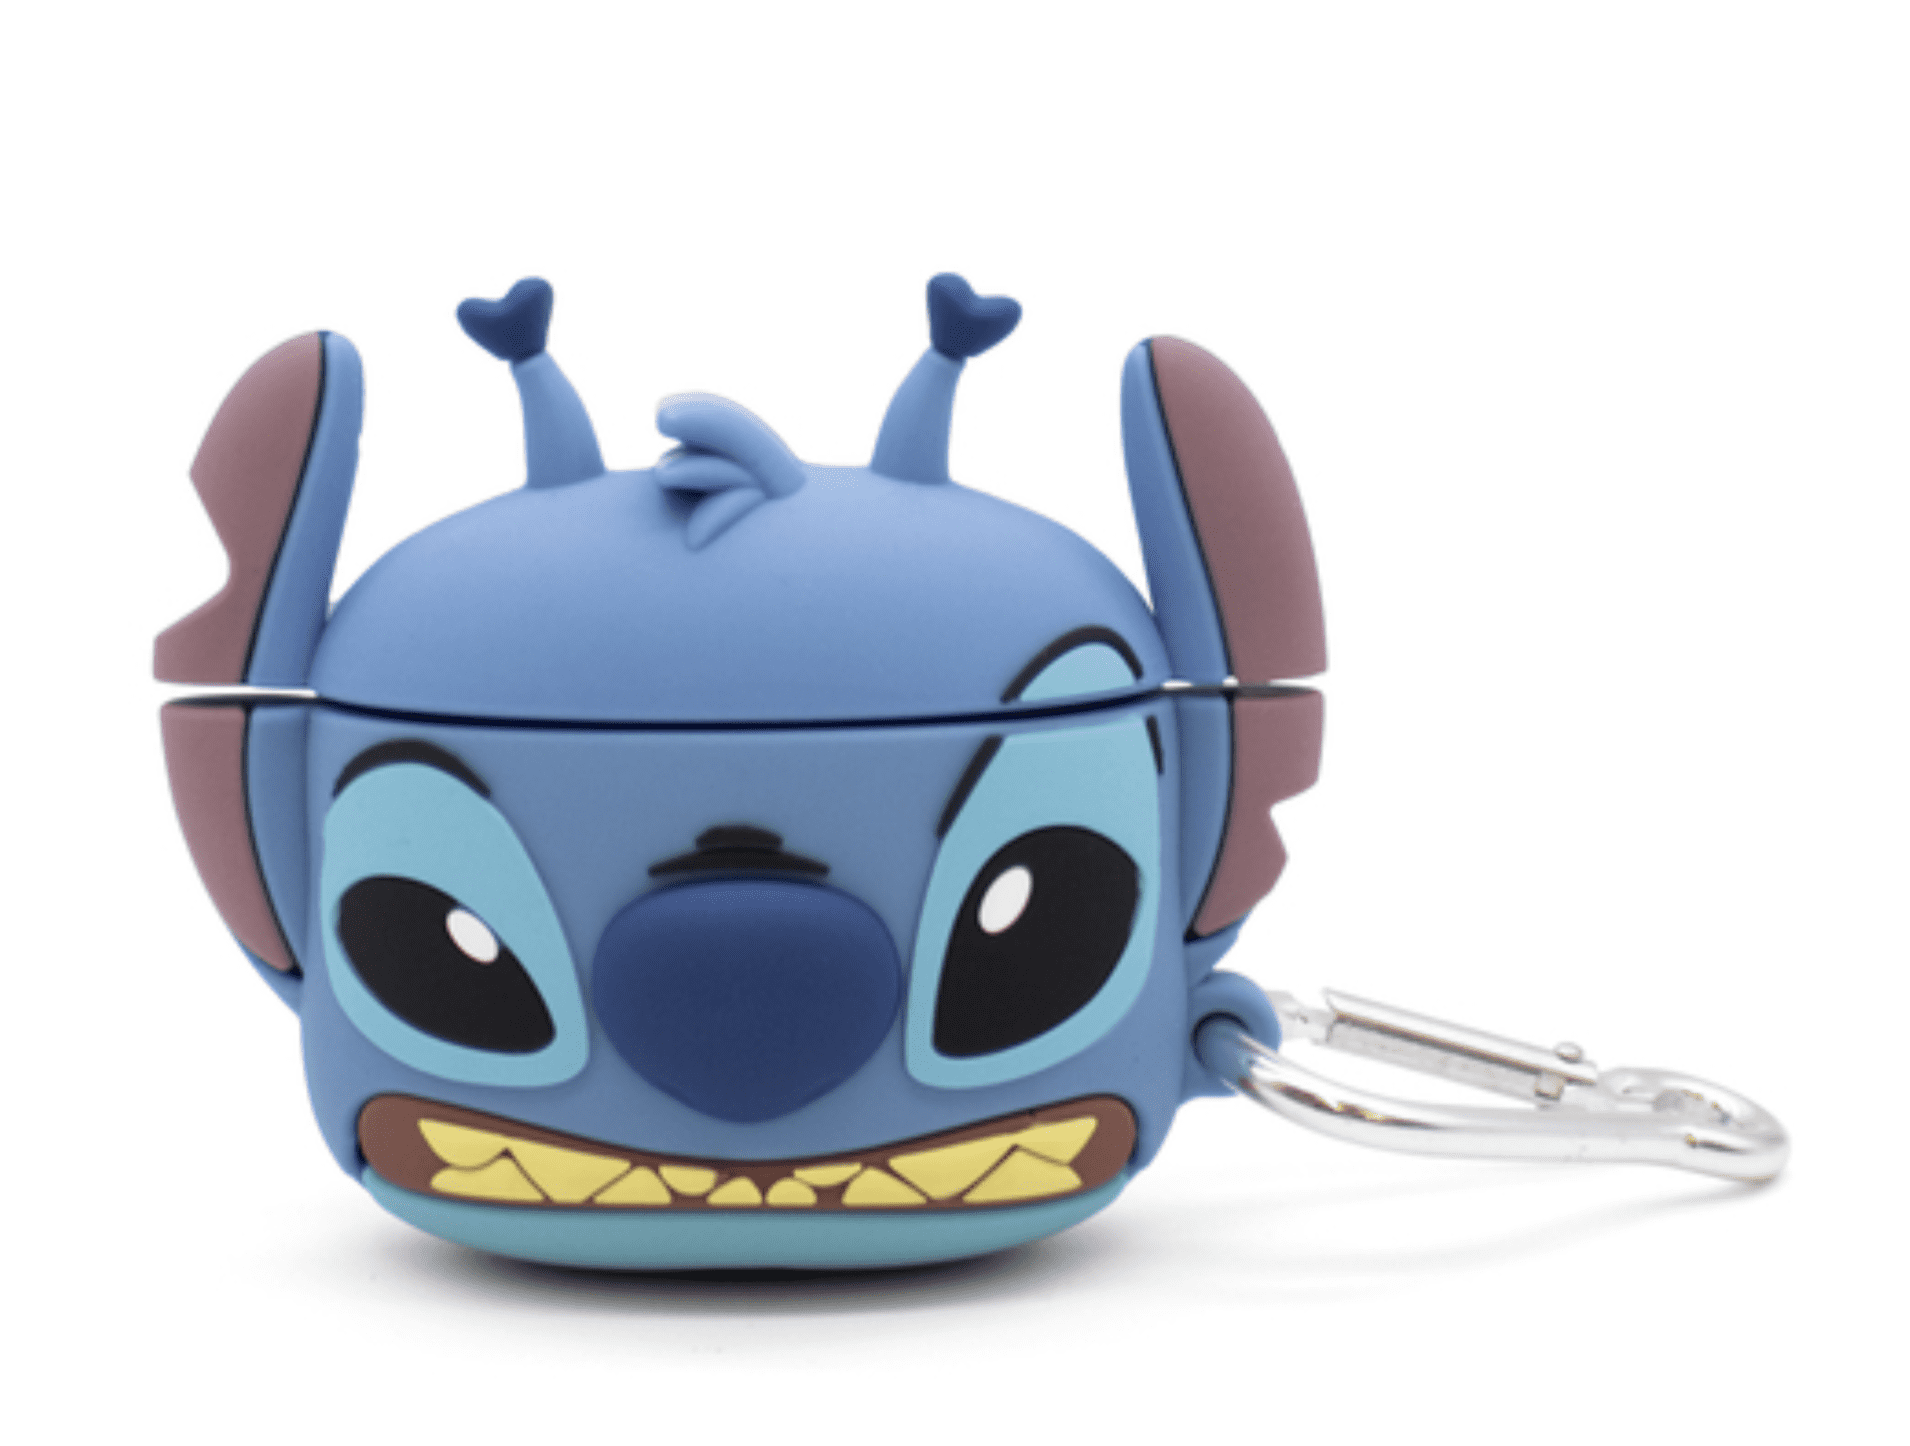 Lilo And Stitch Airpods 2 case Disney Airpods 1 case Airpods Case Airpods Pro case Cover Airpods Holder Airpod Shock Proof Case